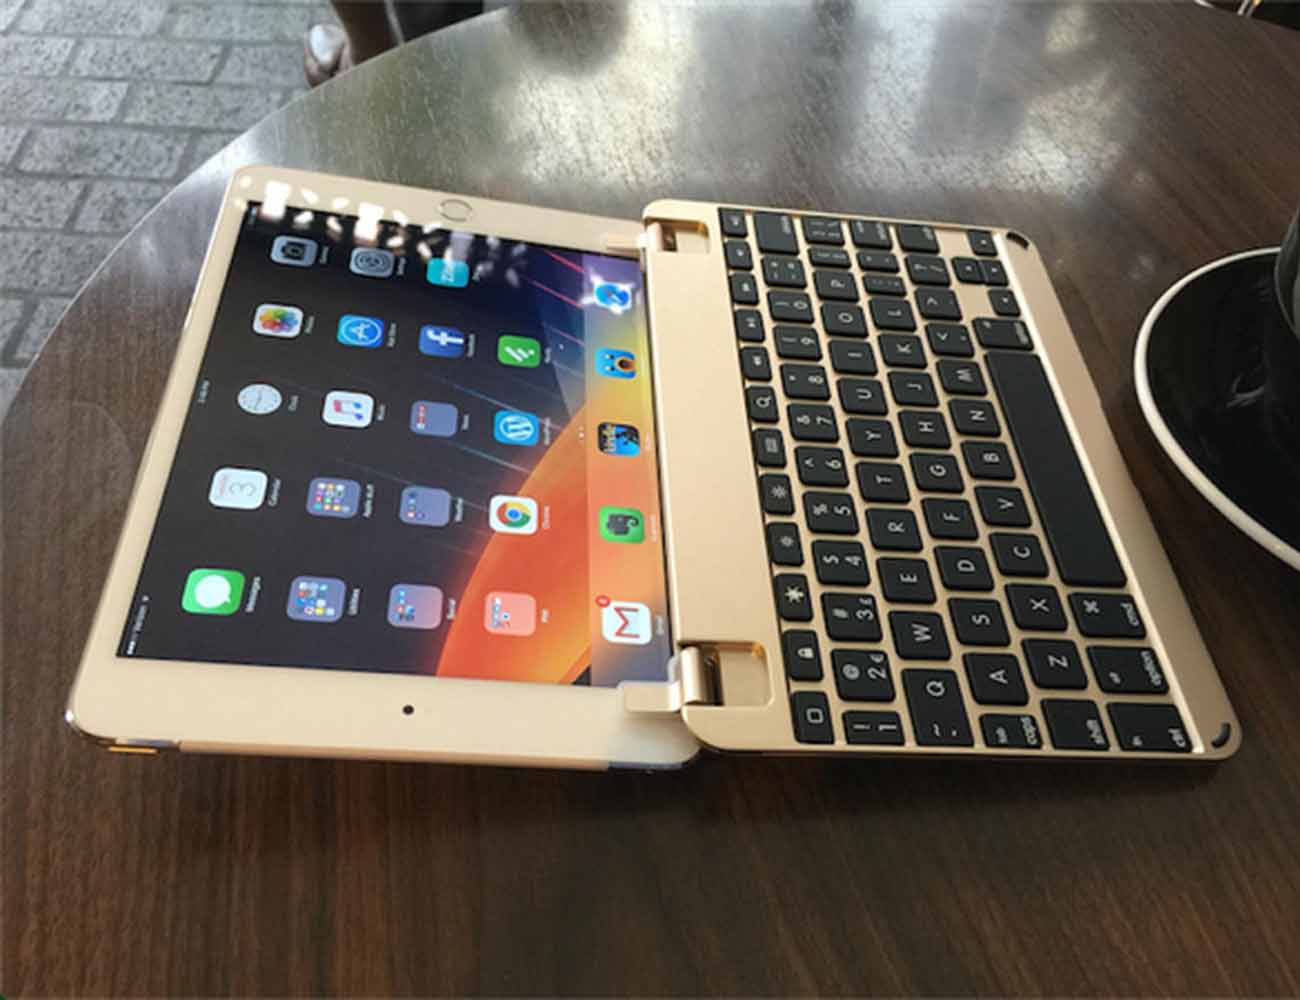 BrydgeMini – Precisely Engineered Keyboards for Your iPad Mini